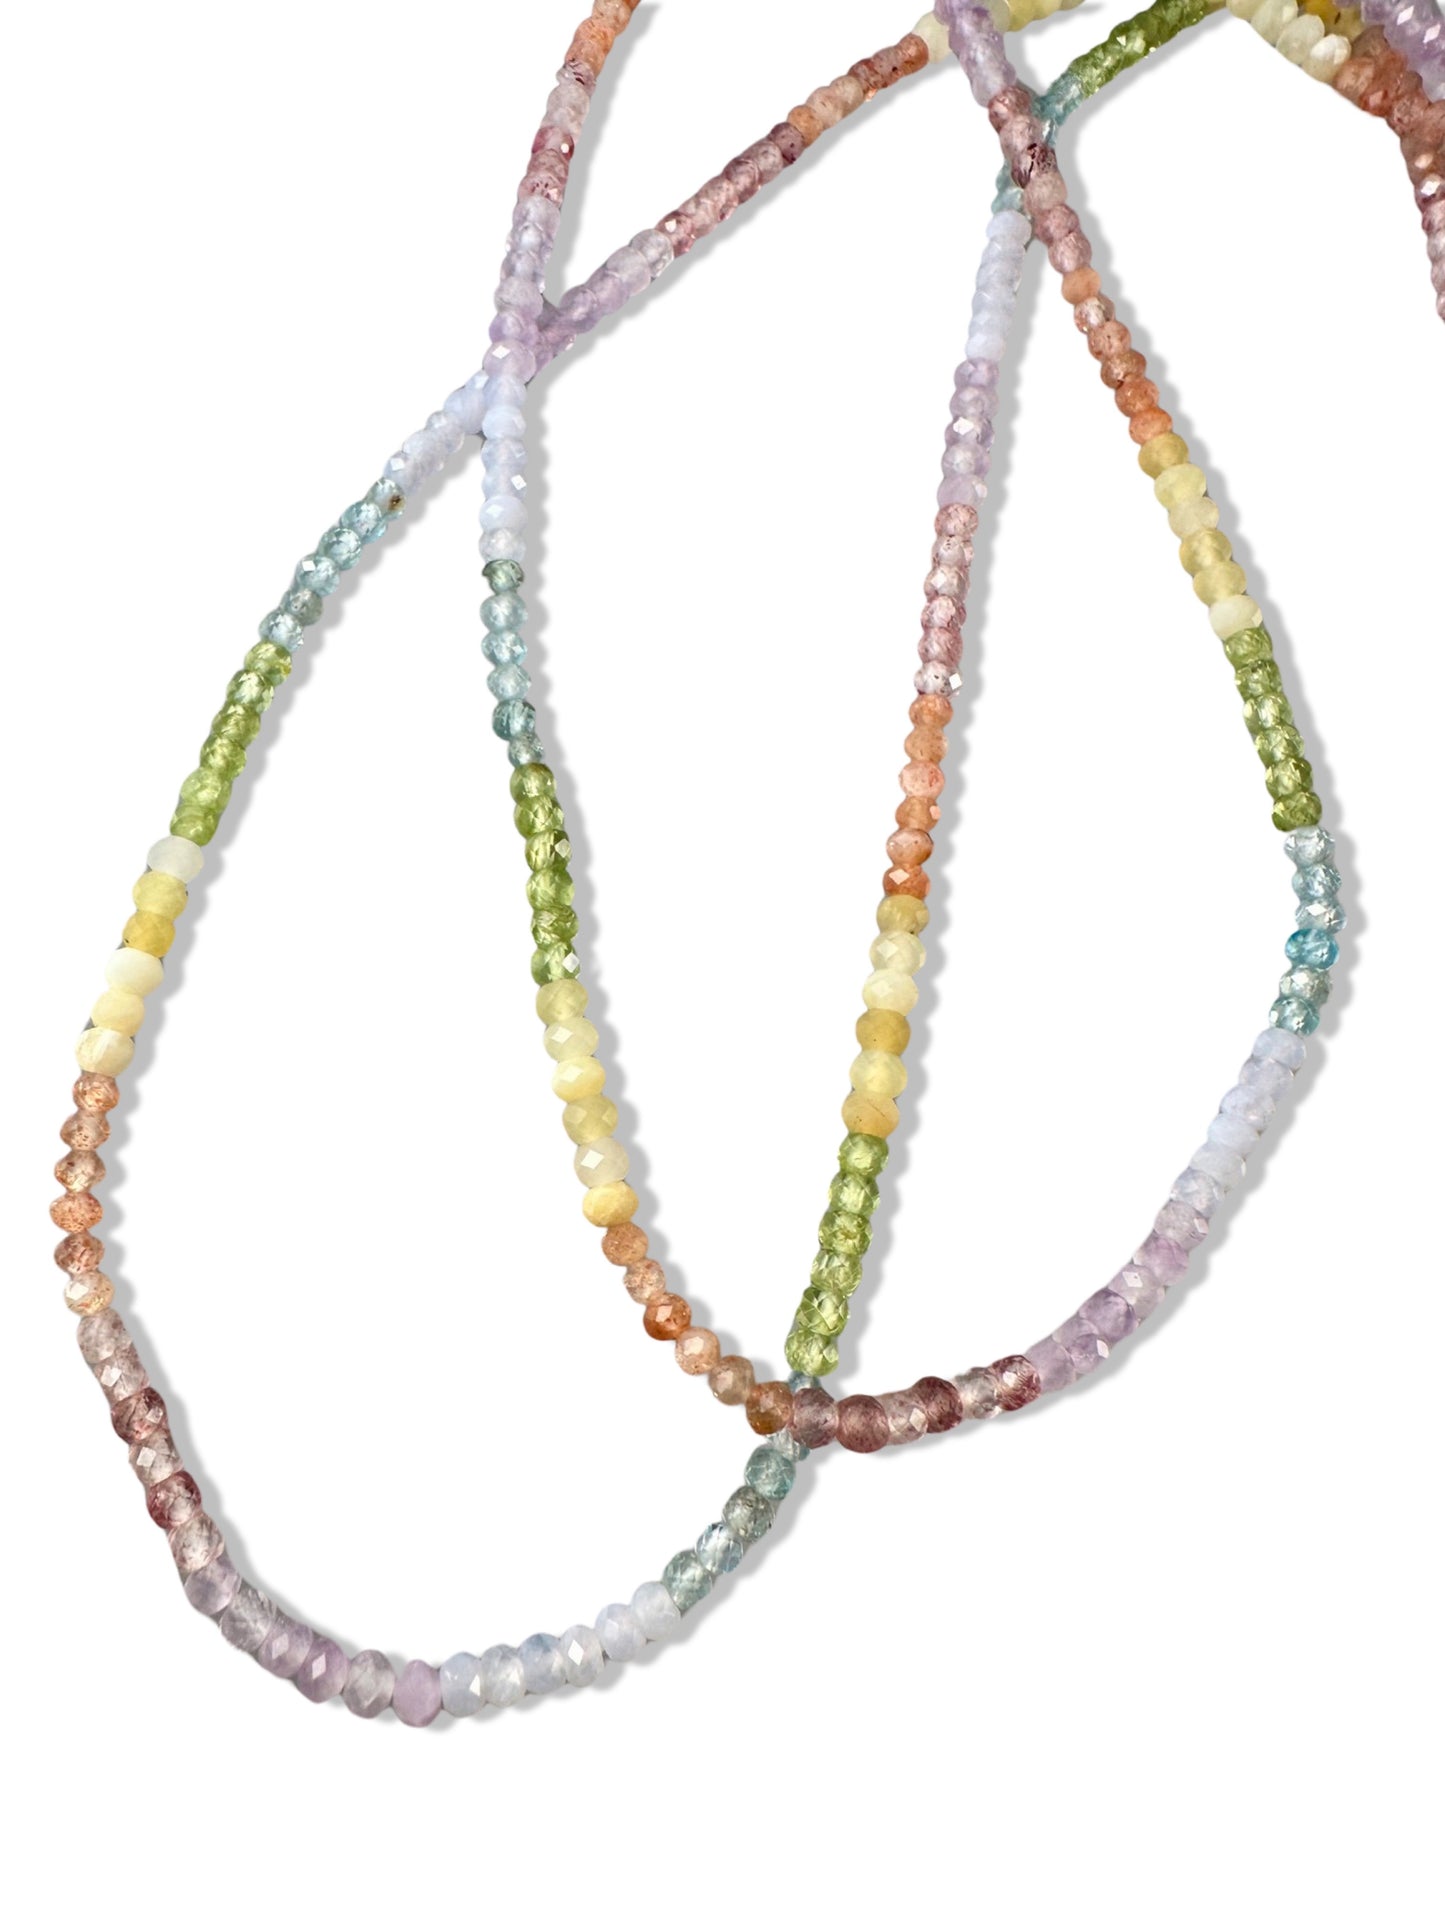 16" Faceted Gemstone Chakra Necklace